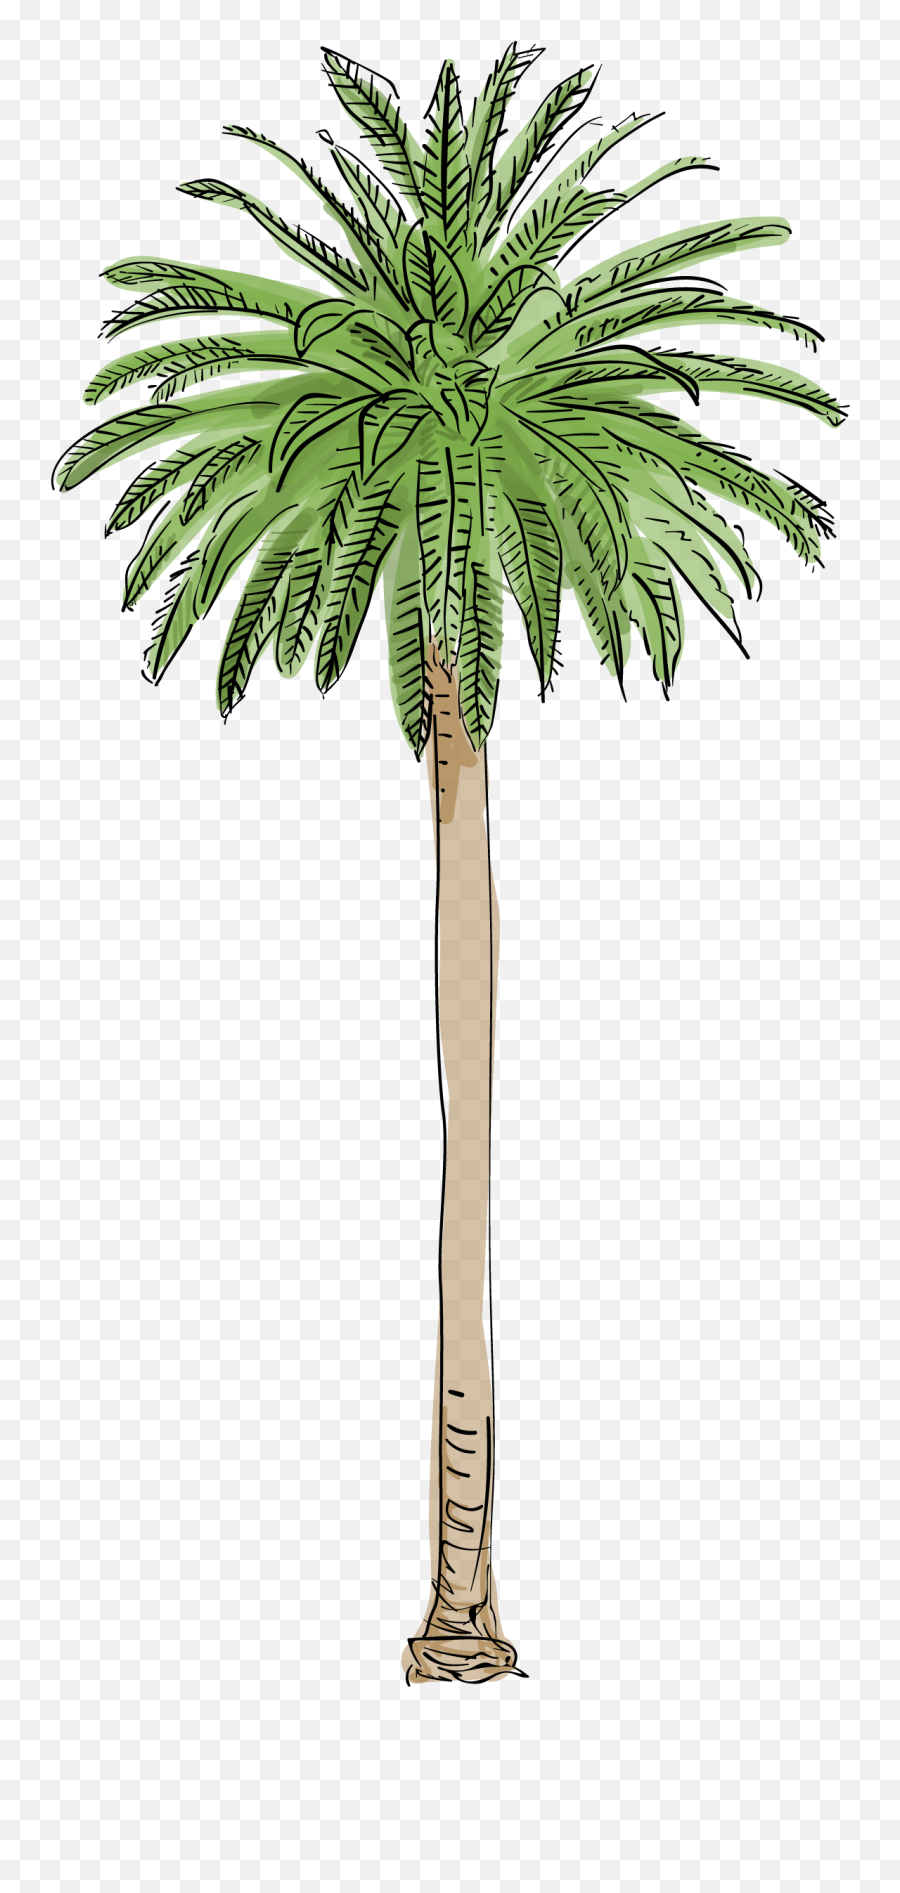 Palm Tree Png Pic - Los Angeles Trees Png Emoji,Download Emoji For Palm Trees